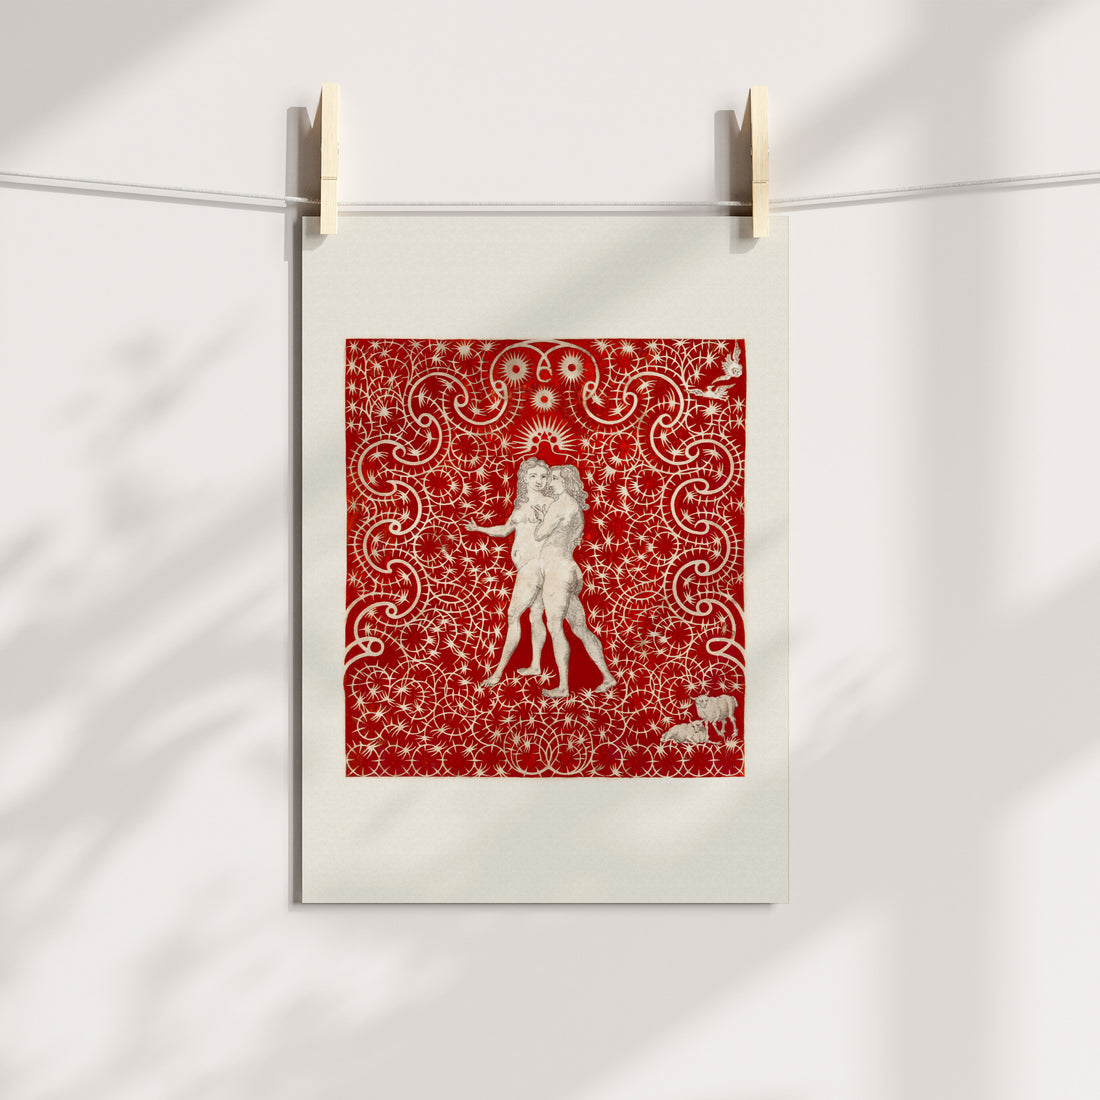 Entwined Figures with Ornate Red Background Vintage Printable Art